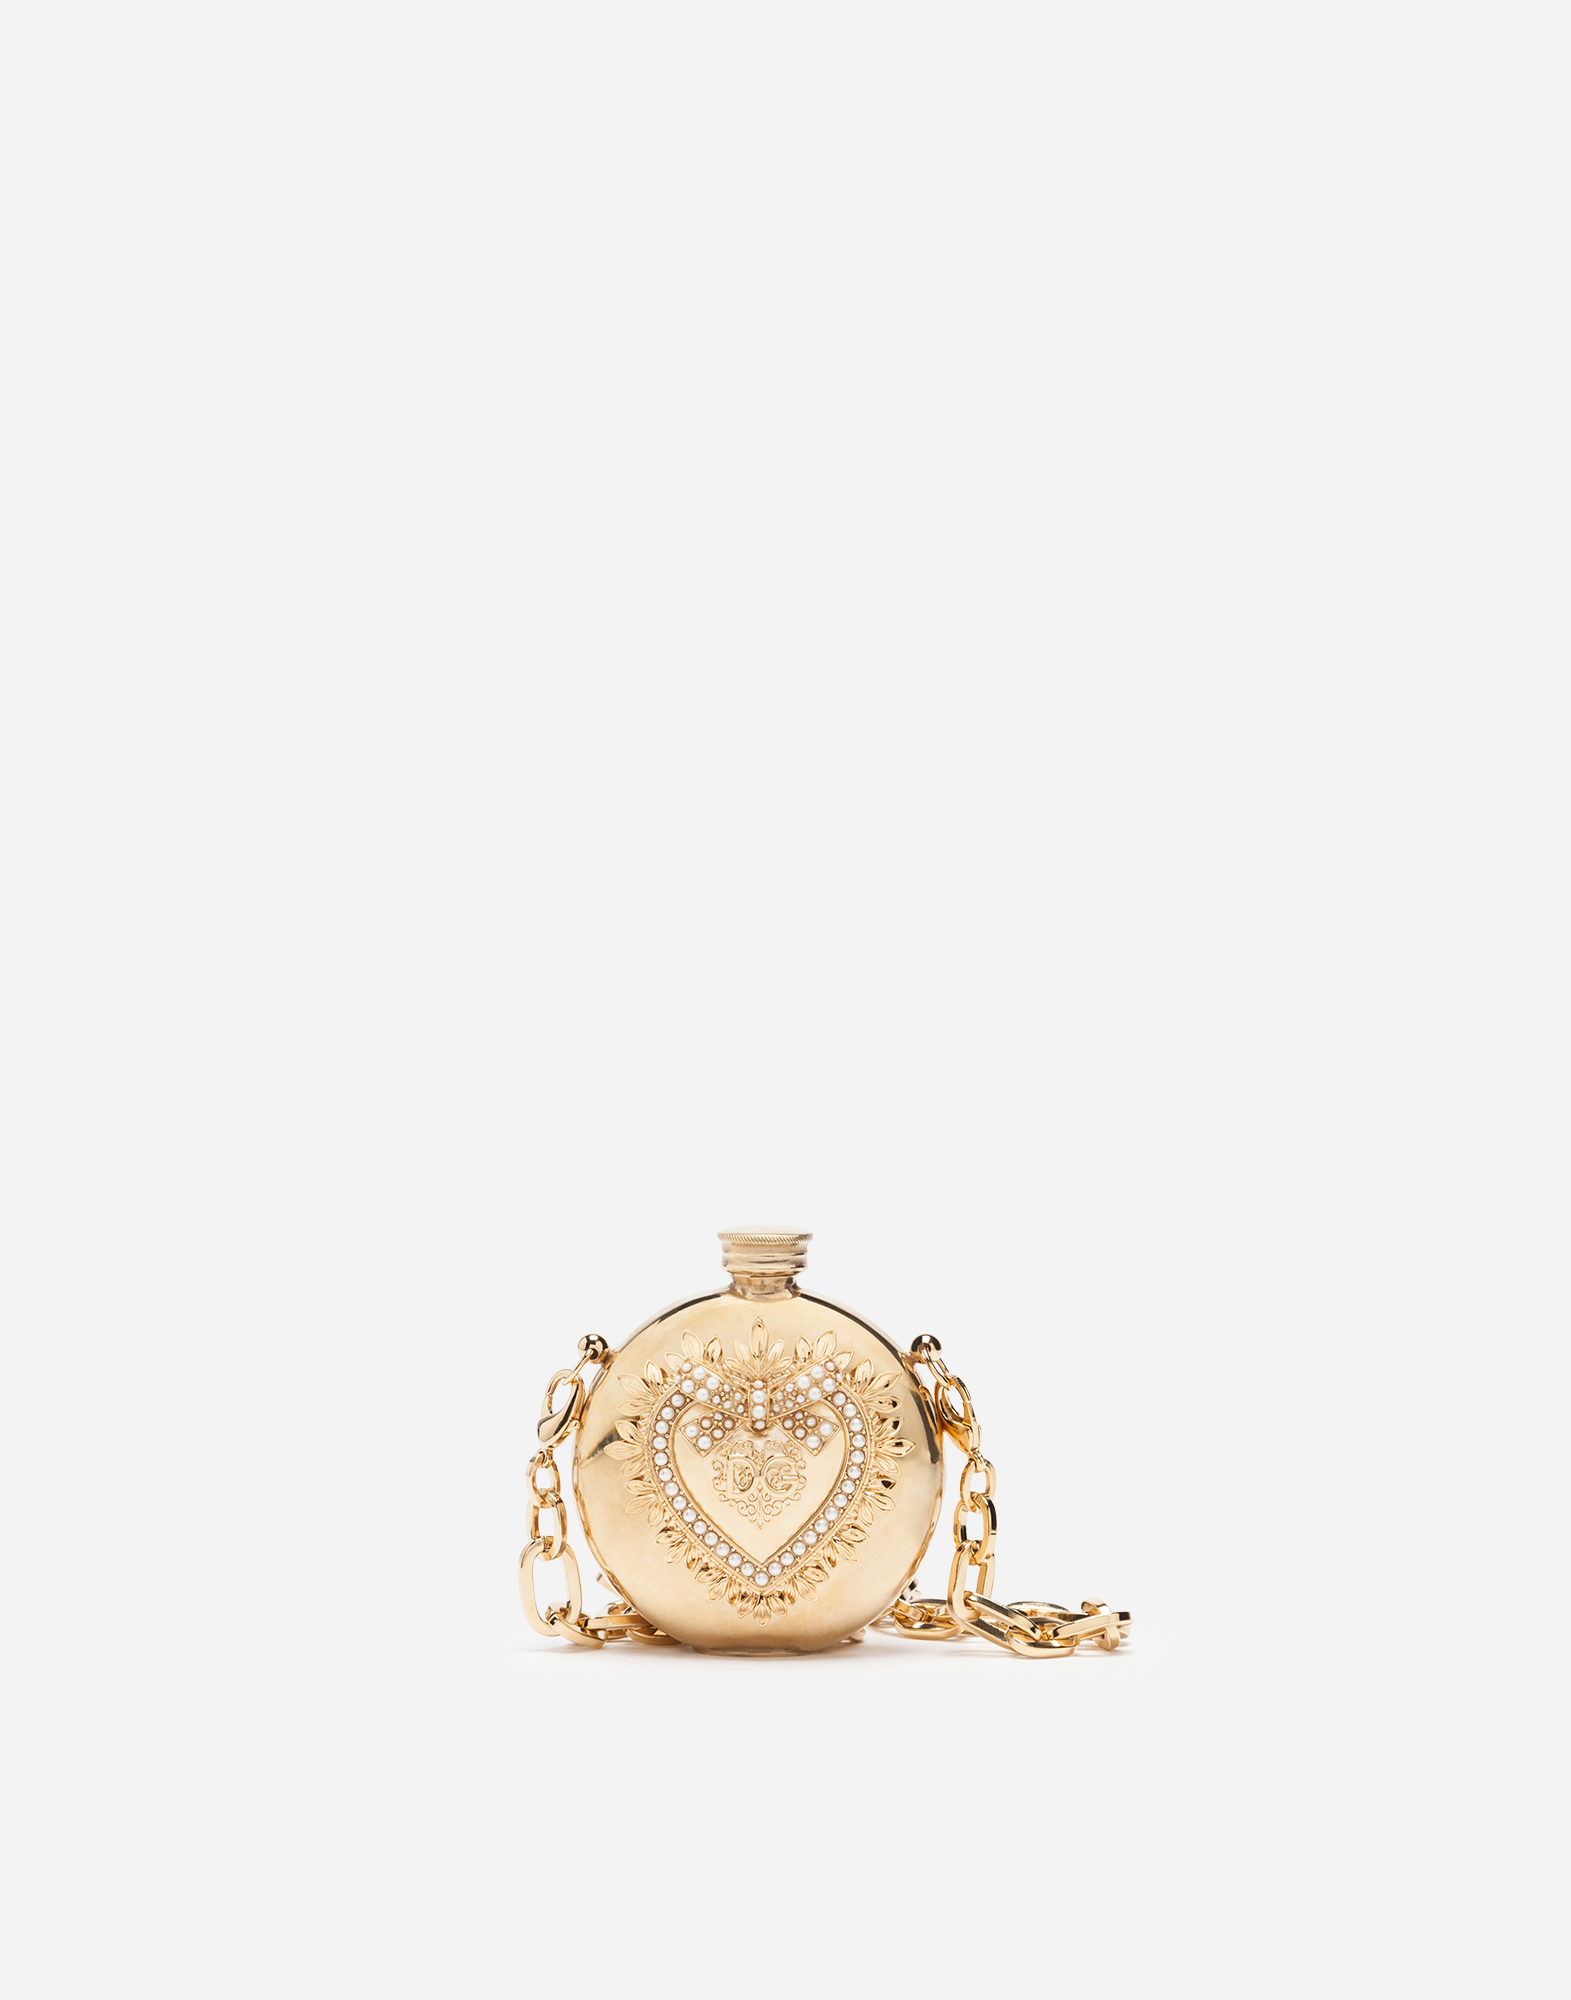 Jewel micro-bag with chain in Gold